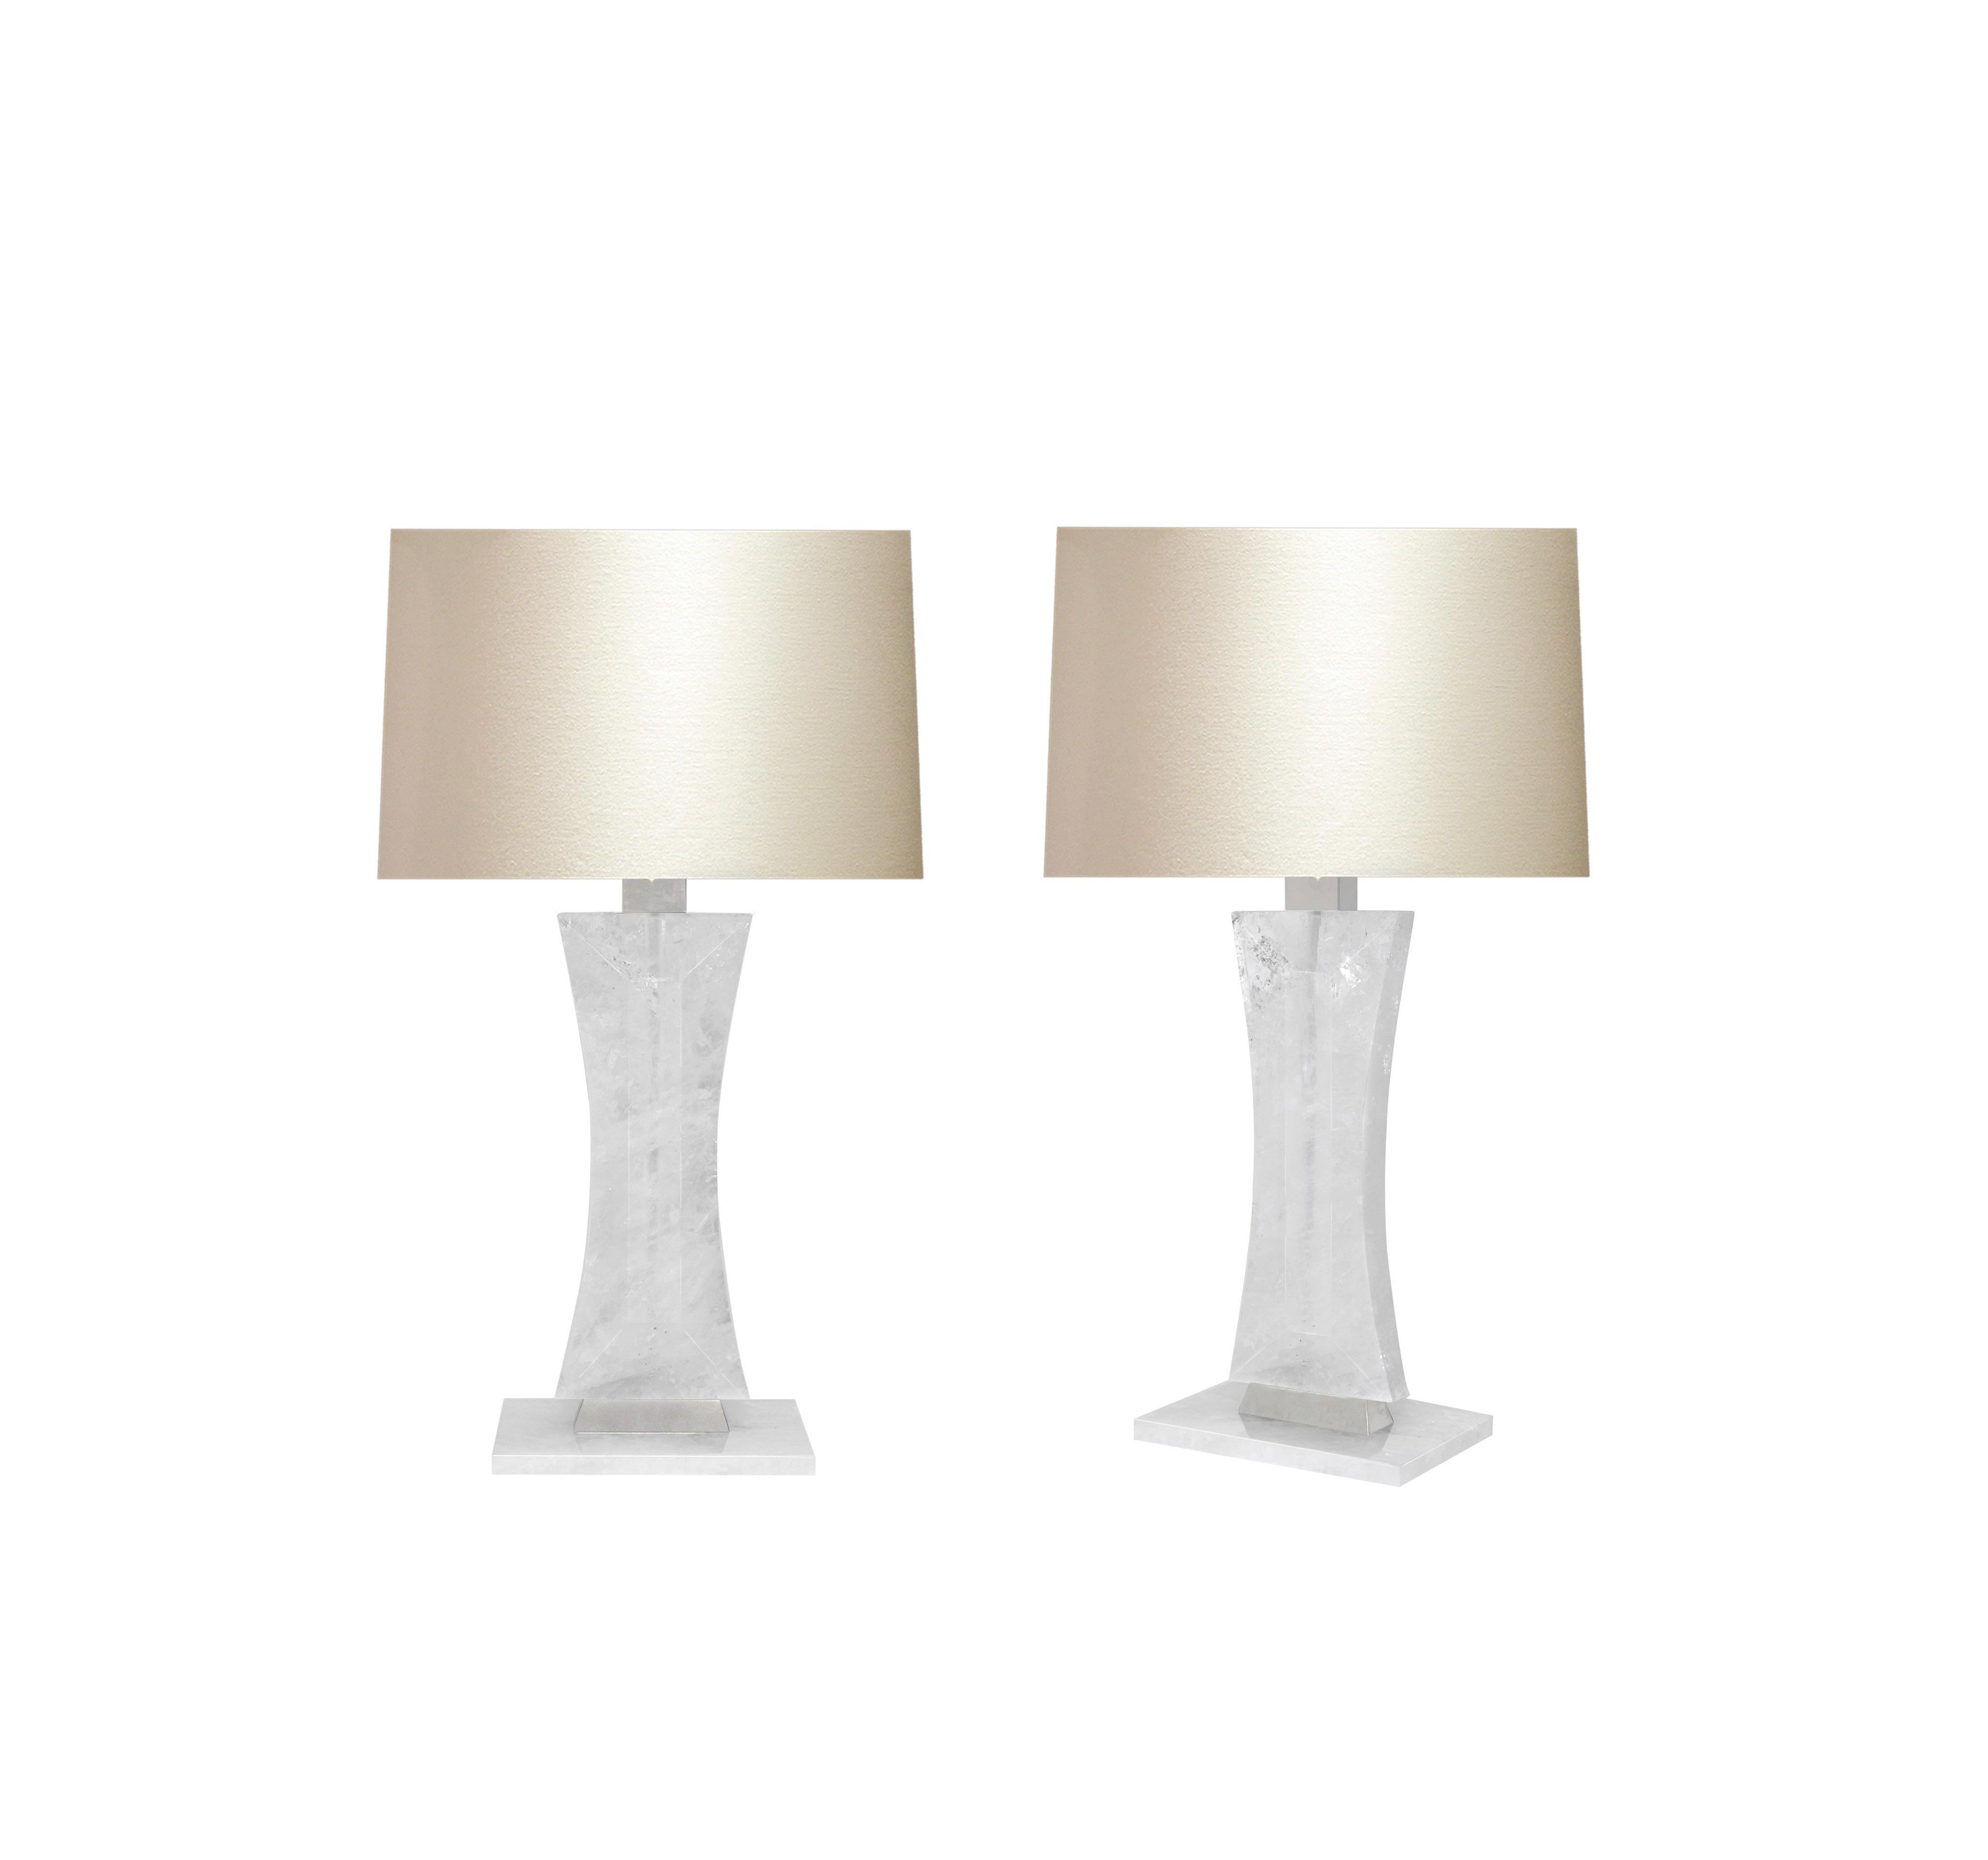 Pair of finely carved modern rock crystal quartz lamps with matte nickel decoration. Created by Phoenix Gallery, NYC.
To the rock crystal: 15.75